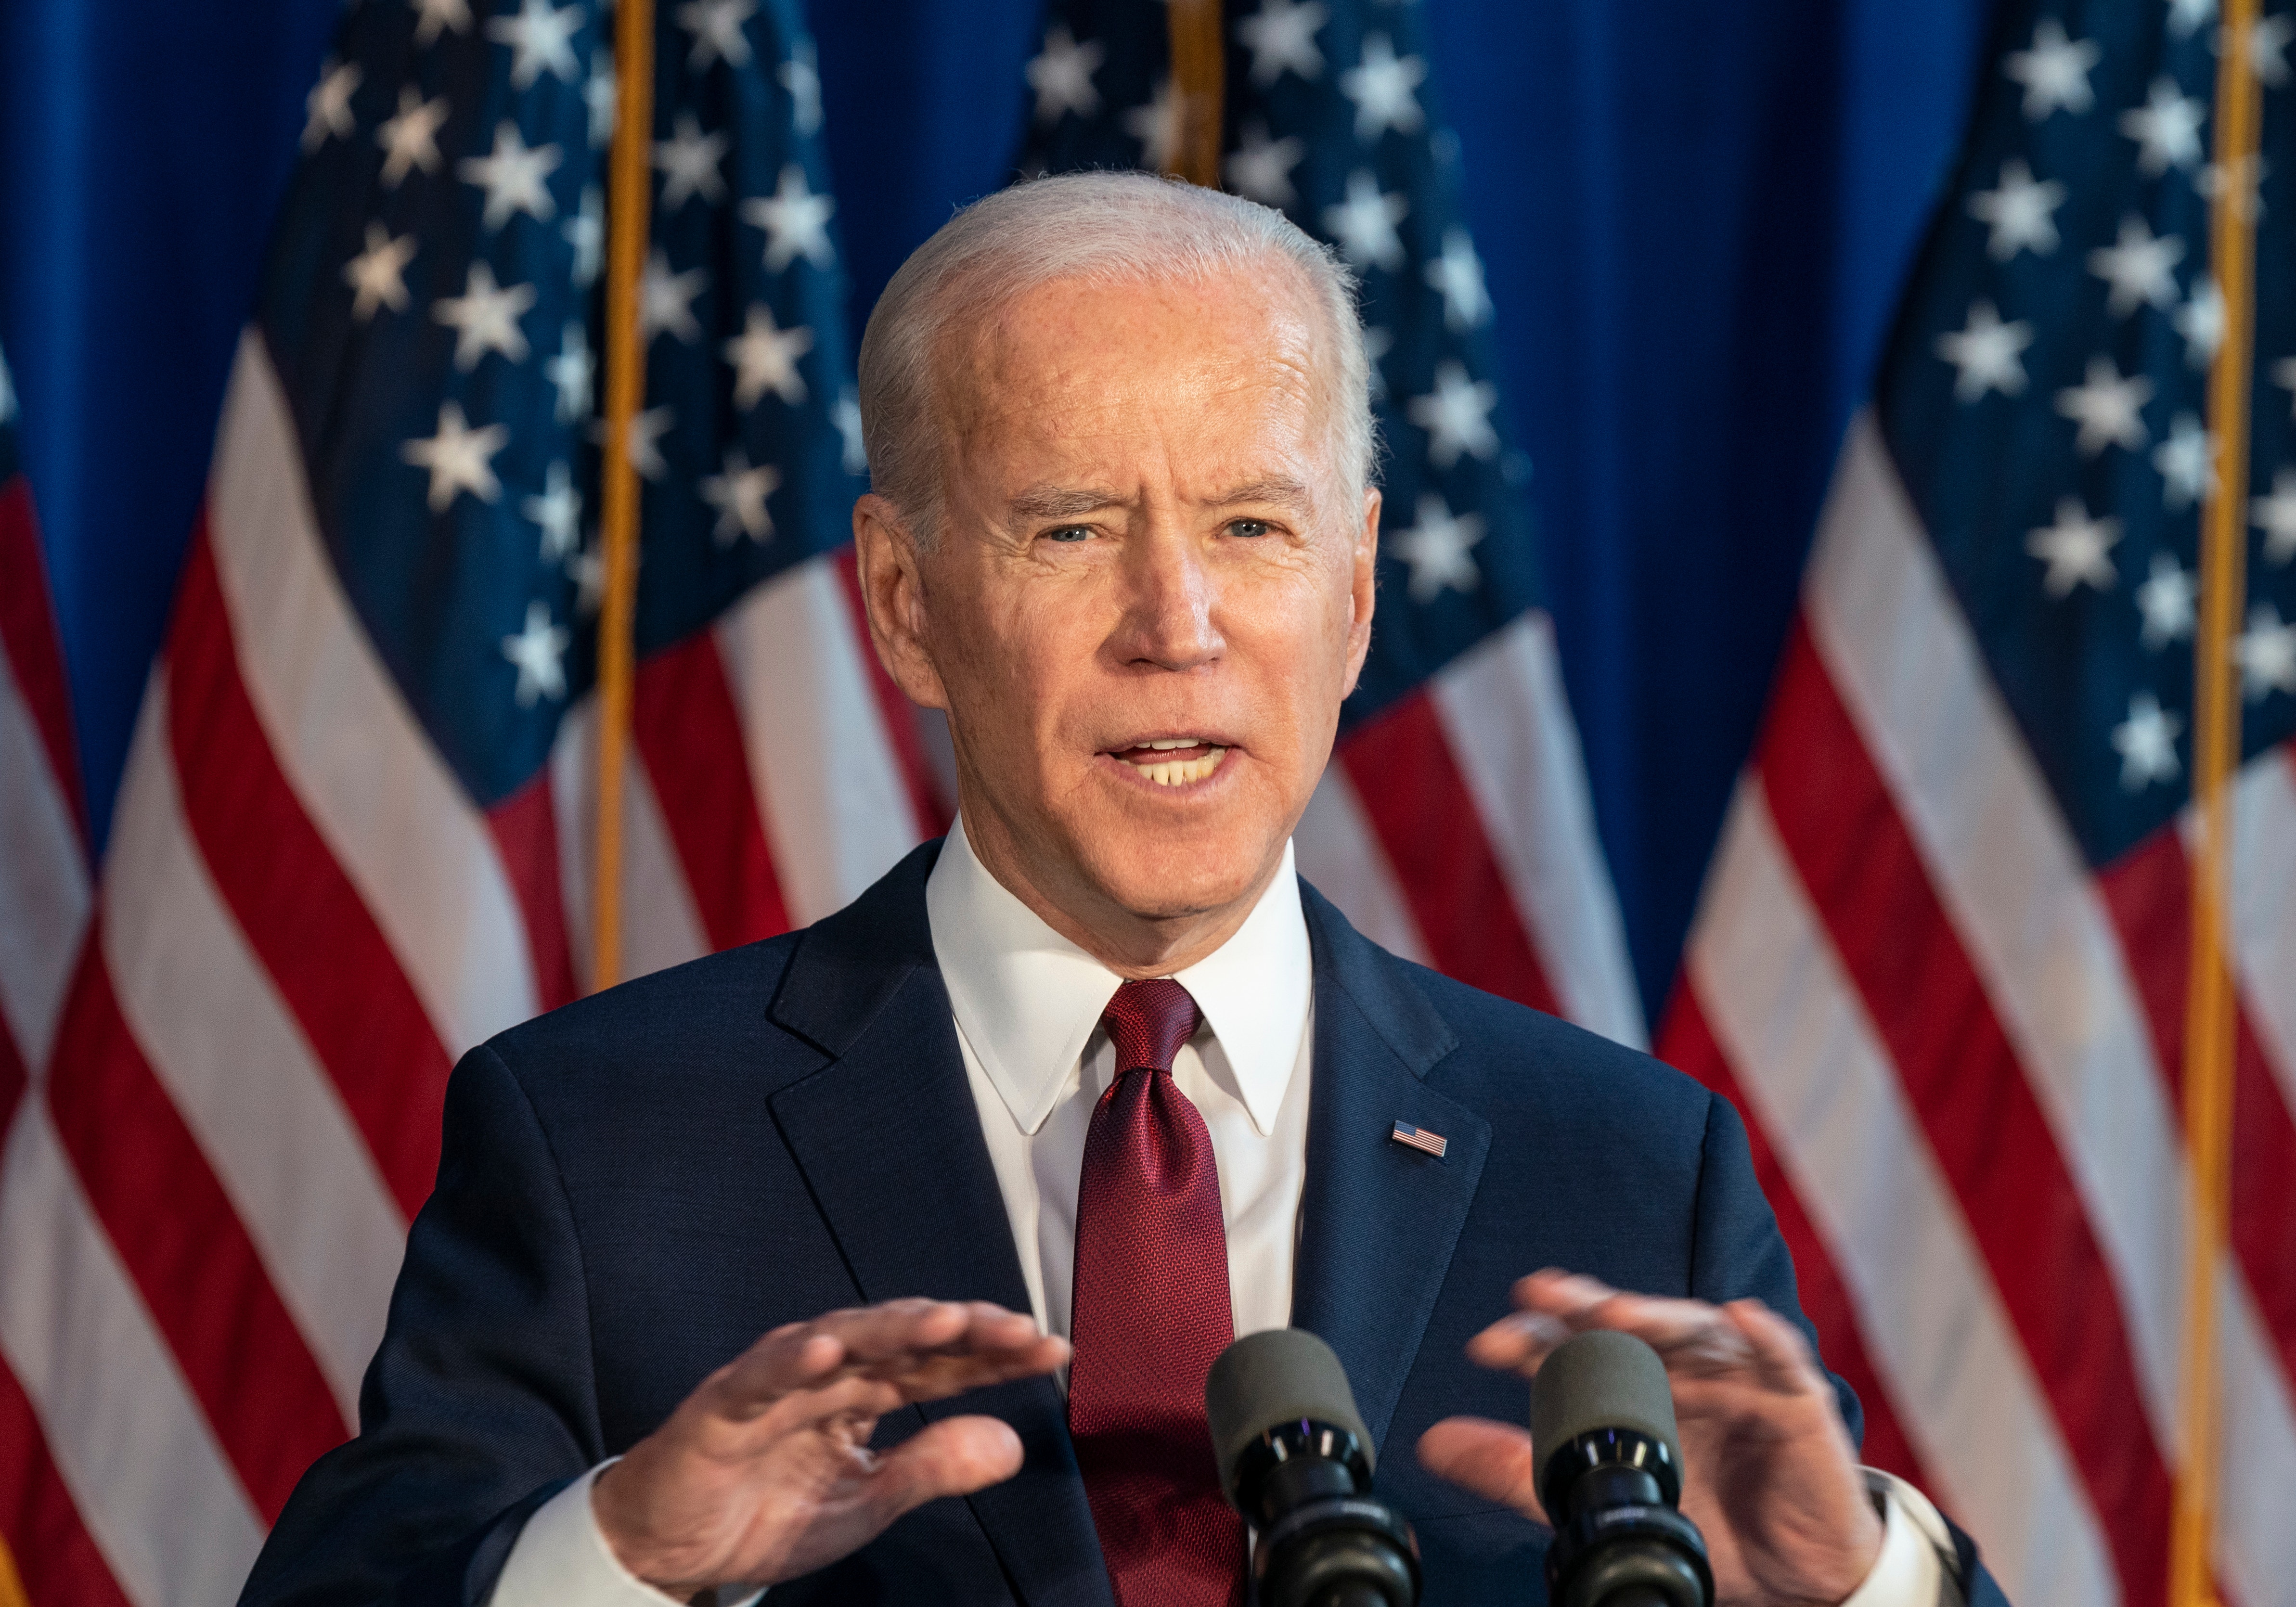 Biden Doesn't Want You To Worry About Today's Market Crash Or Inflation Numbers: 'Economy Is Still Strong'